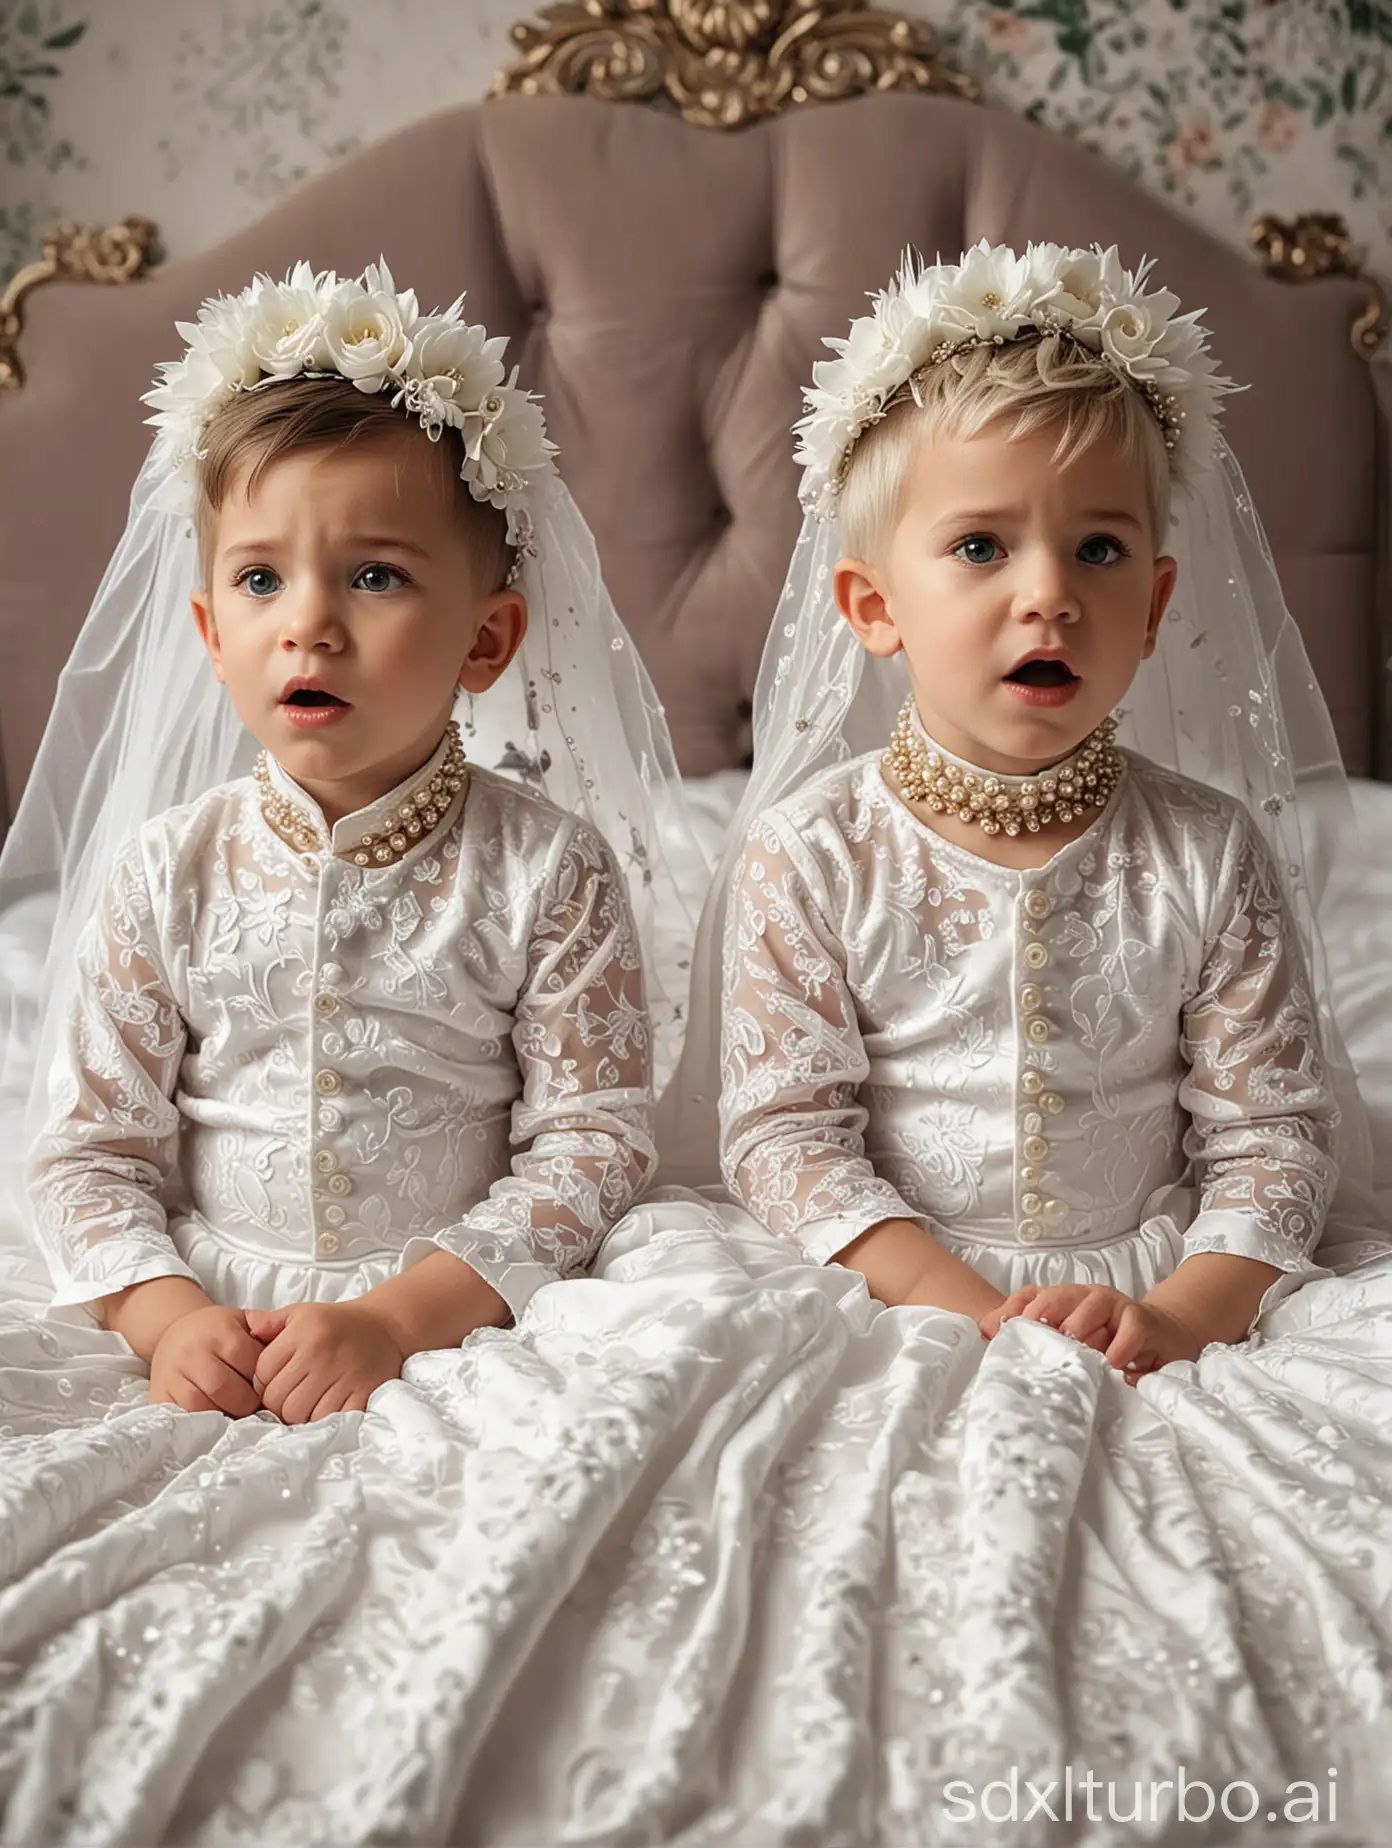 (((Gender role reversal))), 2 cute little boys are waking up in bed, they are tired and confused to find themselves wearing extravagant wedding dresses with flowery textures and veils, choker necklaces with spikes on, short smart hair, they are looking down at their clothes, energetic